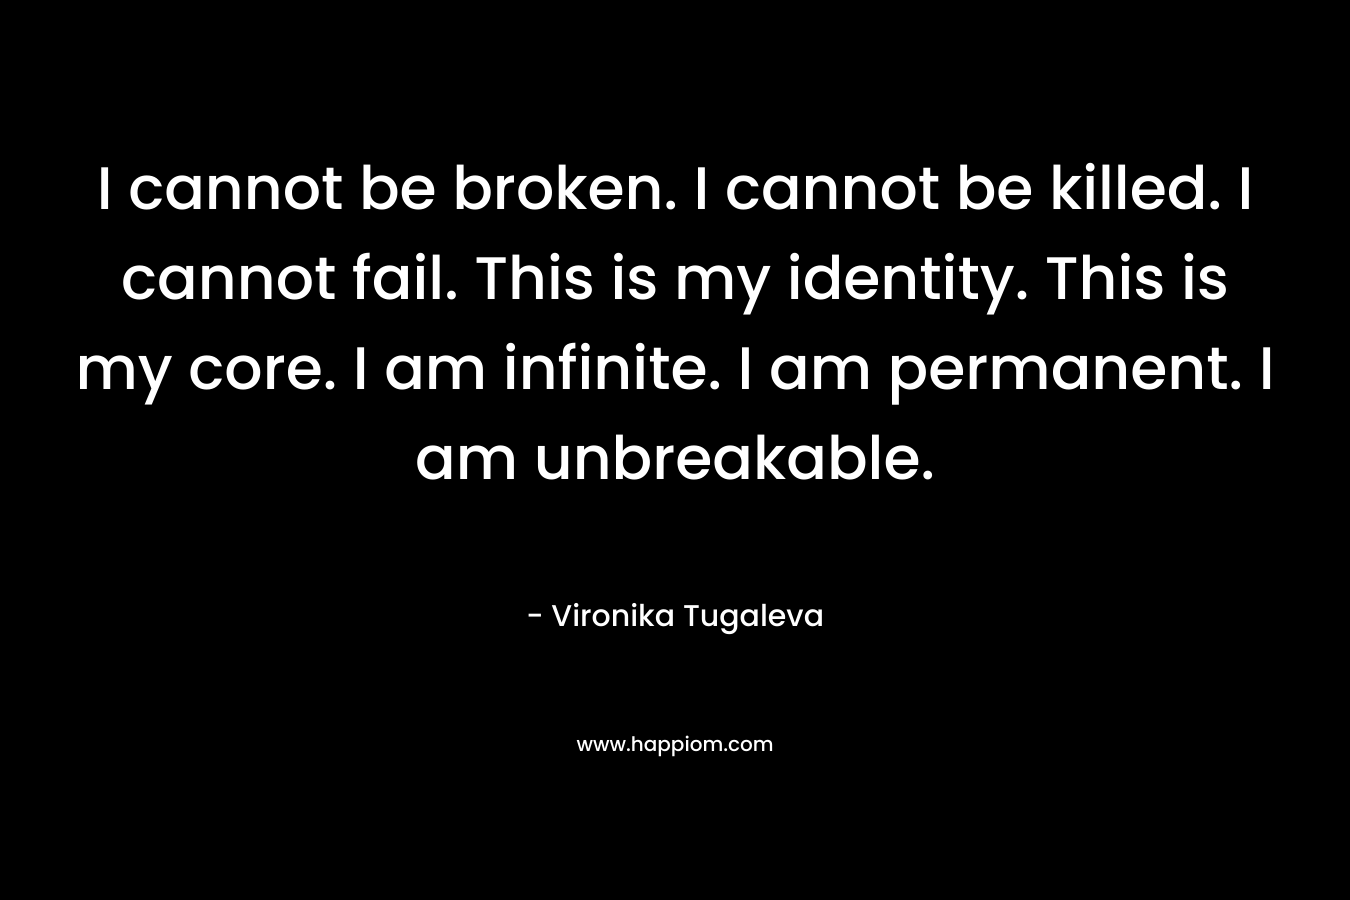 I cannot be broken. I cannot be killed. I cannot fail. This is my identity. This is my core. I am infinite. I am permanent. I am unbreakable.